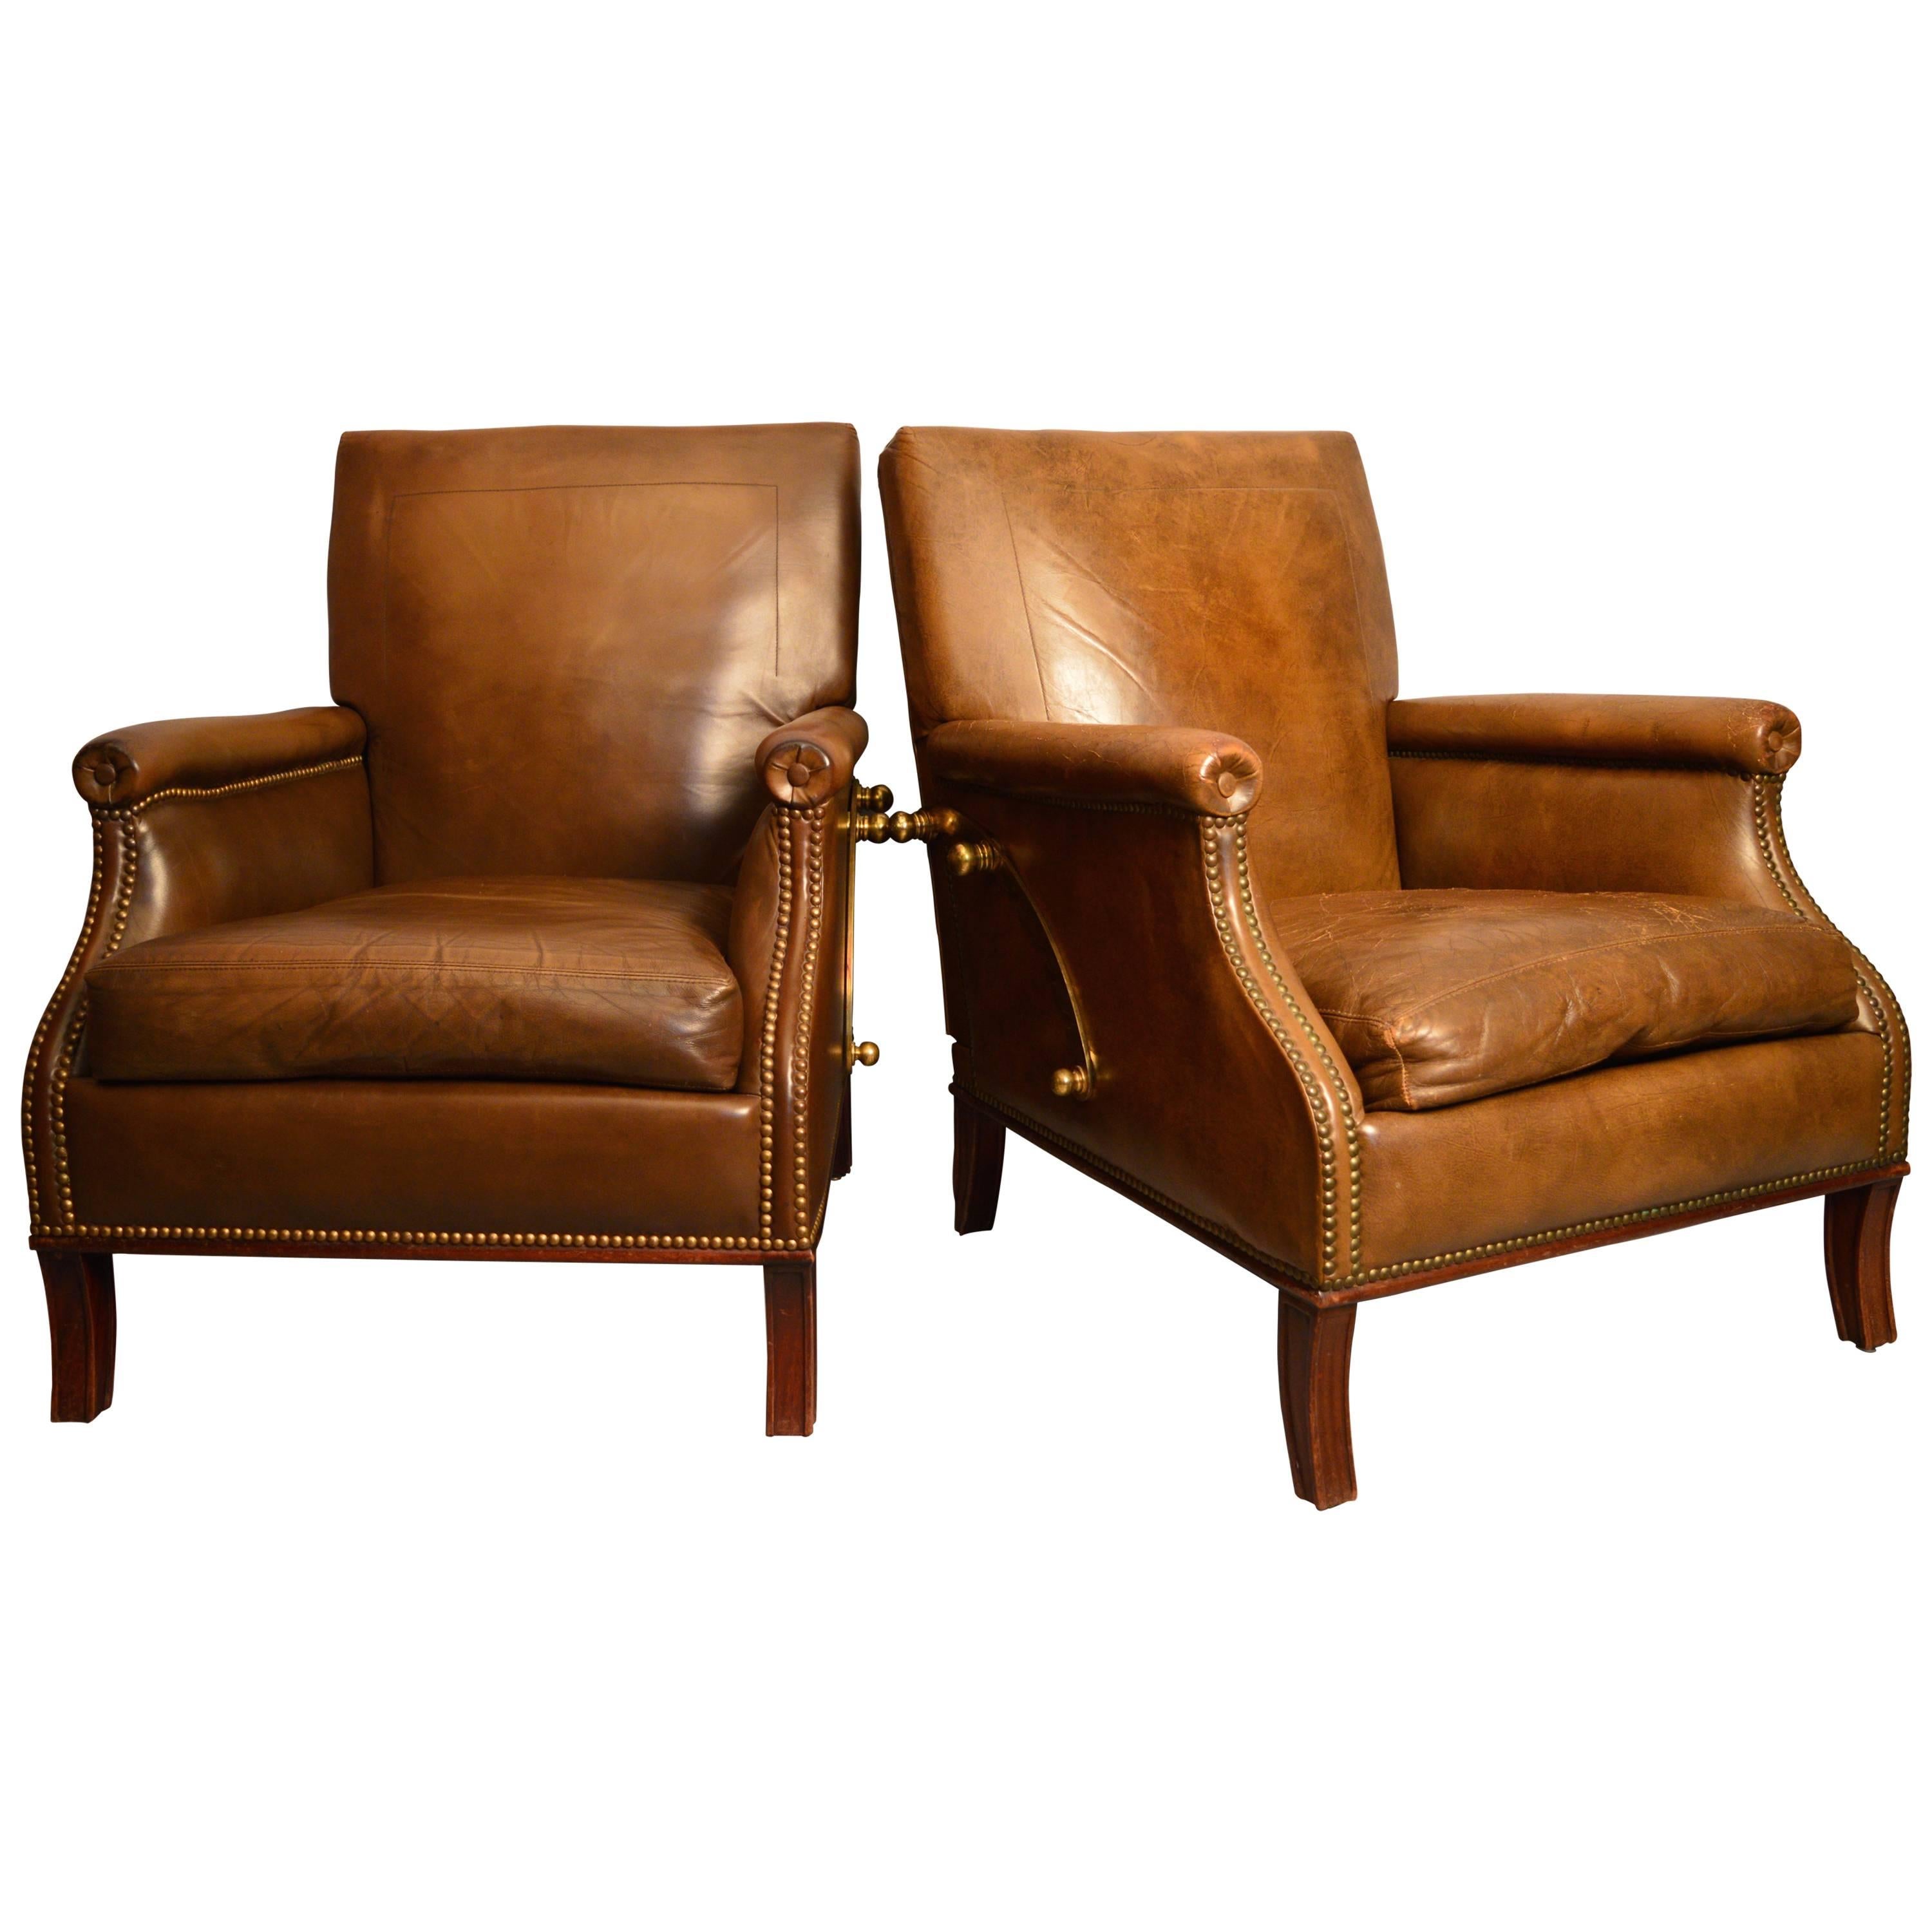 Pair of French Leather Reclining Armchairs